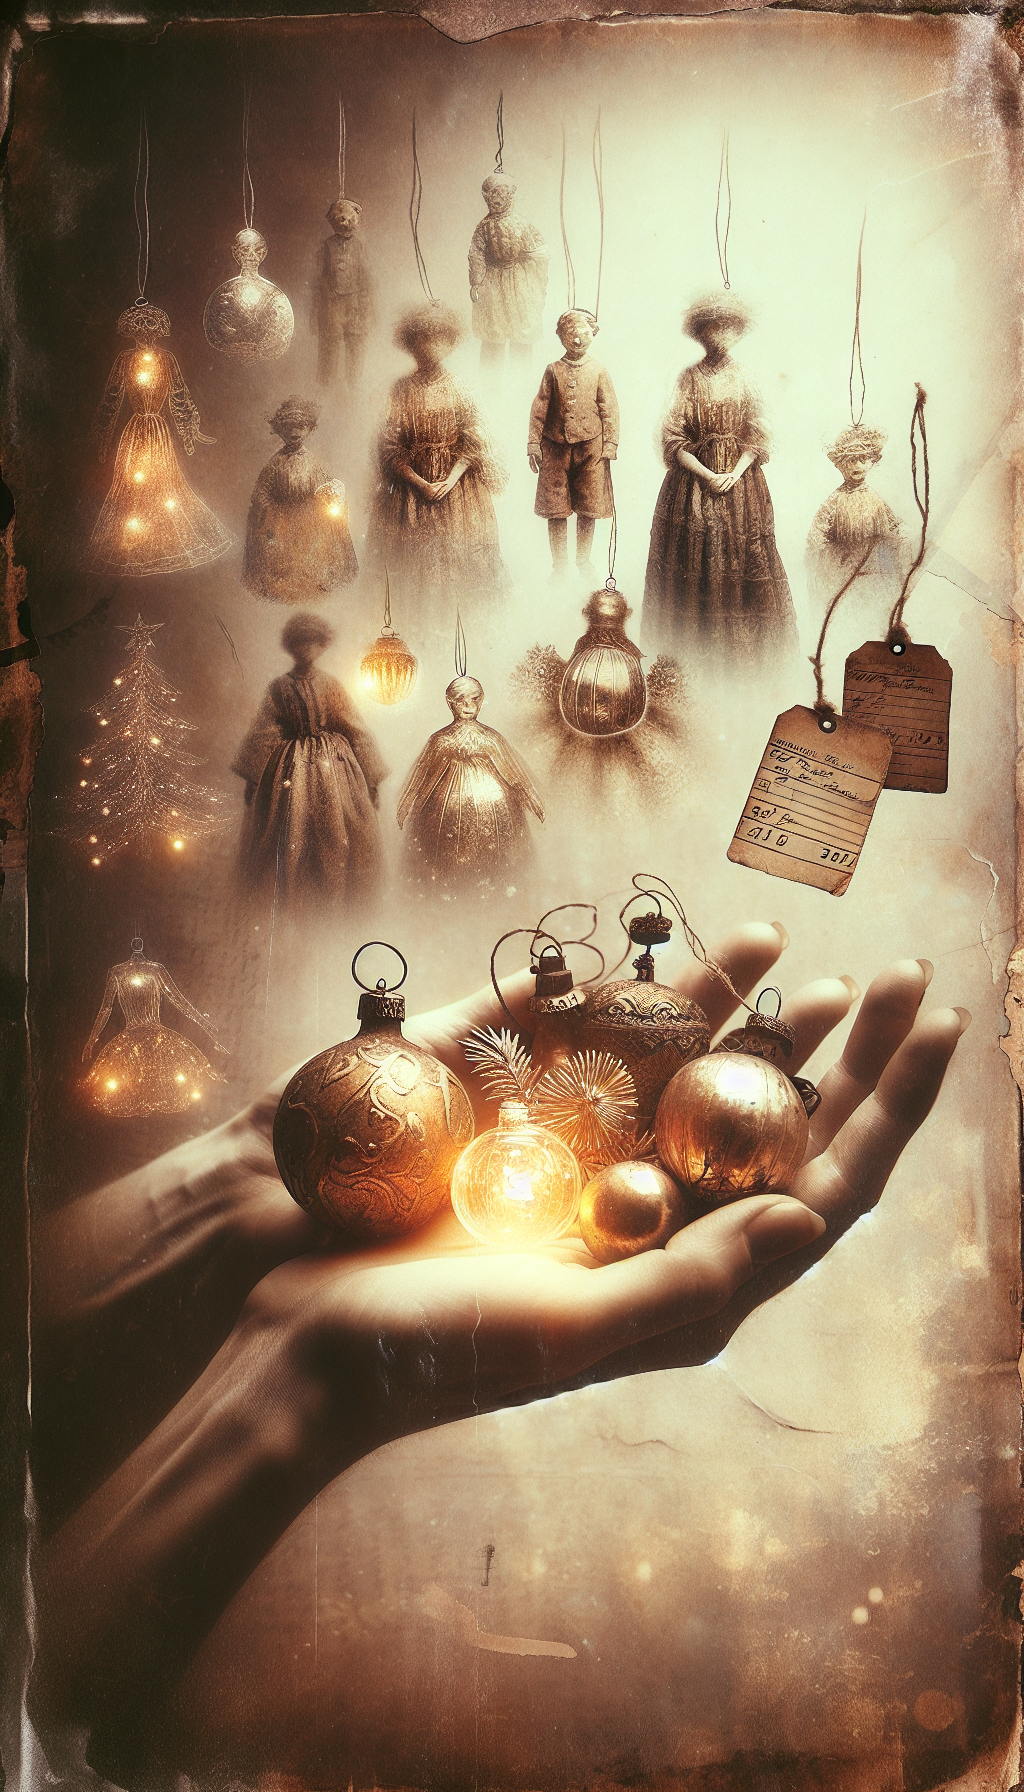 In a whimsical collage of time-worn textures and sepia tones, the illustration highlights a delicate hand cradling an assortment of glowing vintage Christmas ornaments. In the background, a faded price tag dangles from a gilded bauble, while transparent ghostly figures denote past generations admiring the same ornaments, reinforcing the timeless value these antiques hold.